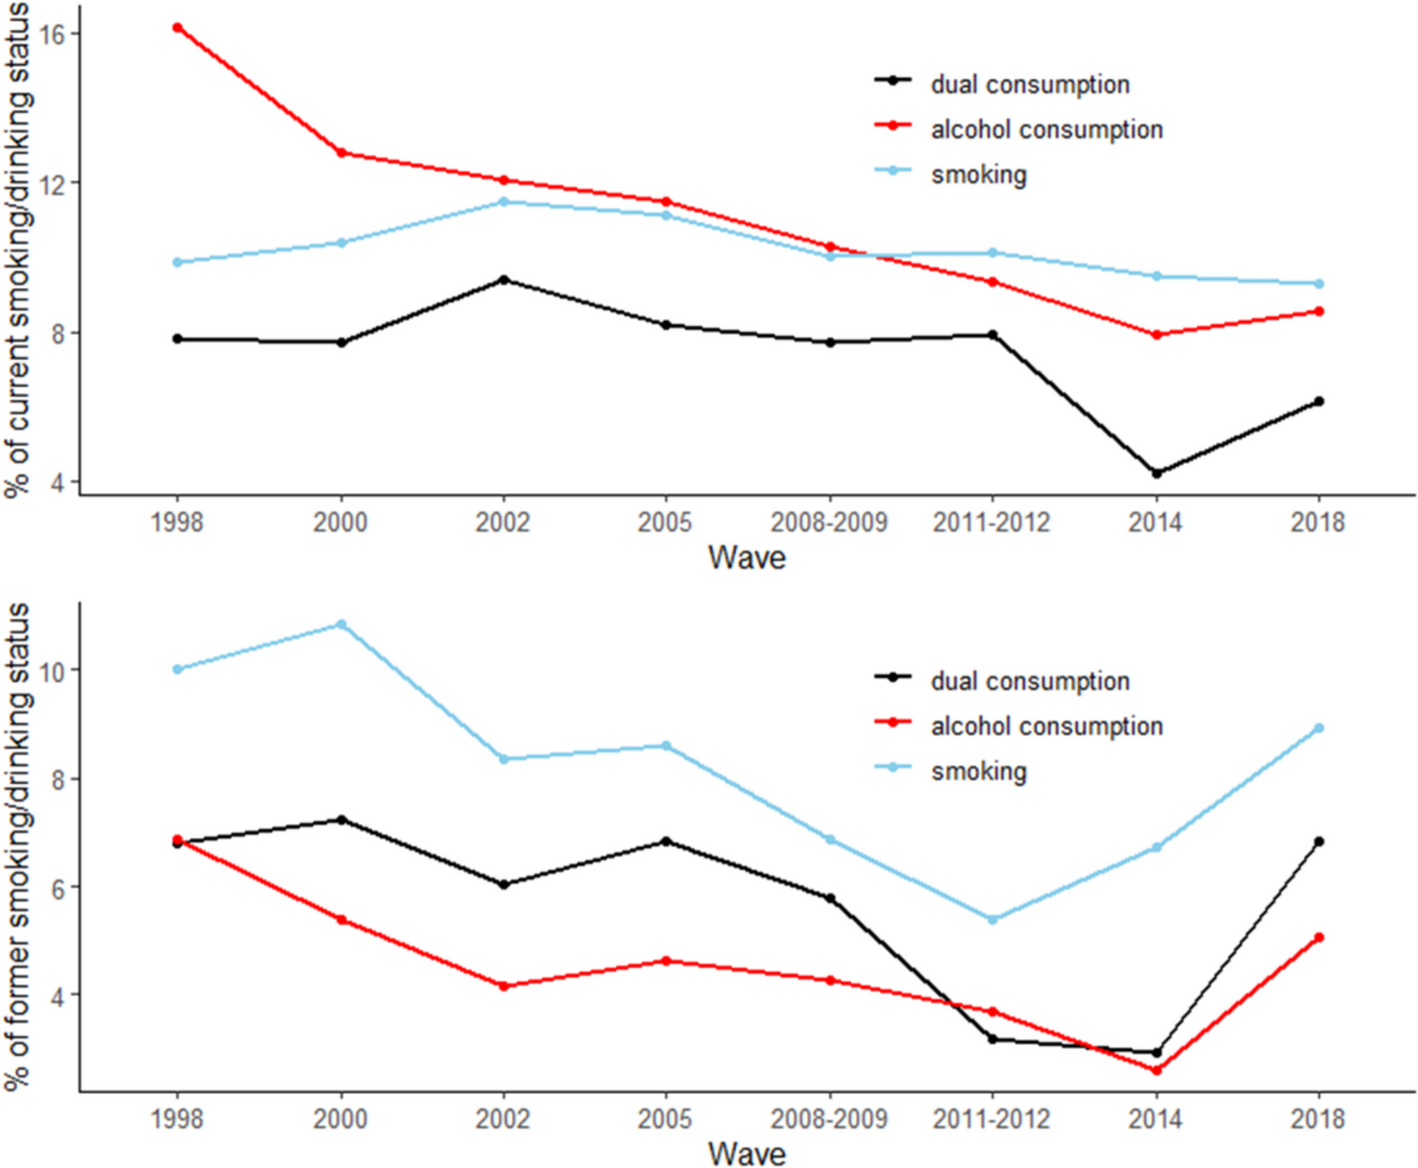 Twenty-Year Trends and Urban–Rural Disparities in Smoking, Alcohol Consumption, and Dual Consumption Among Chinese Older Adults